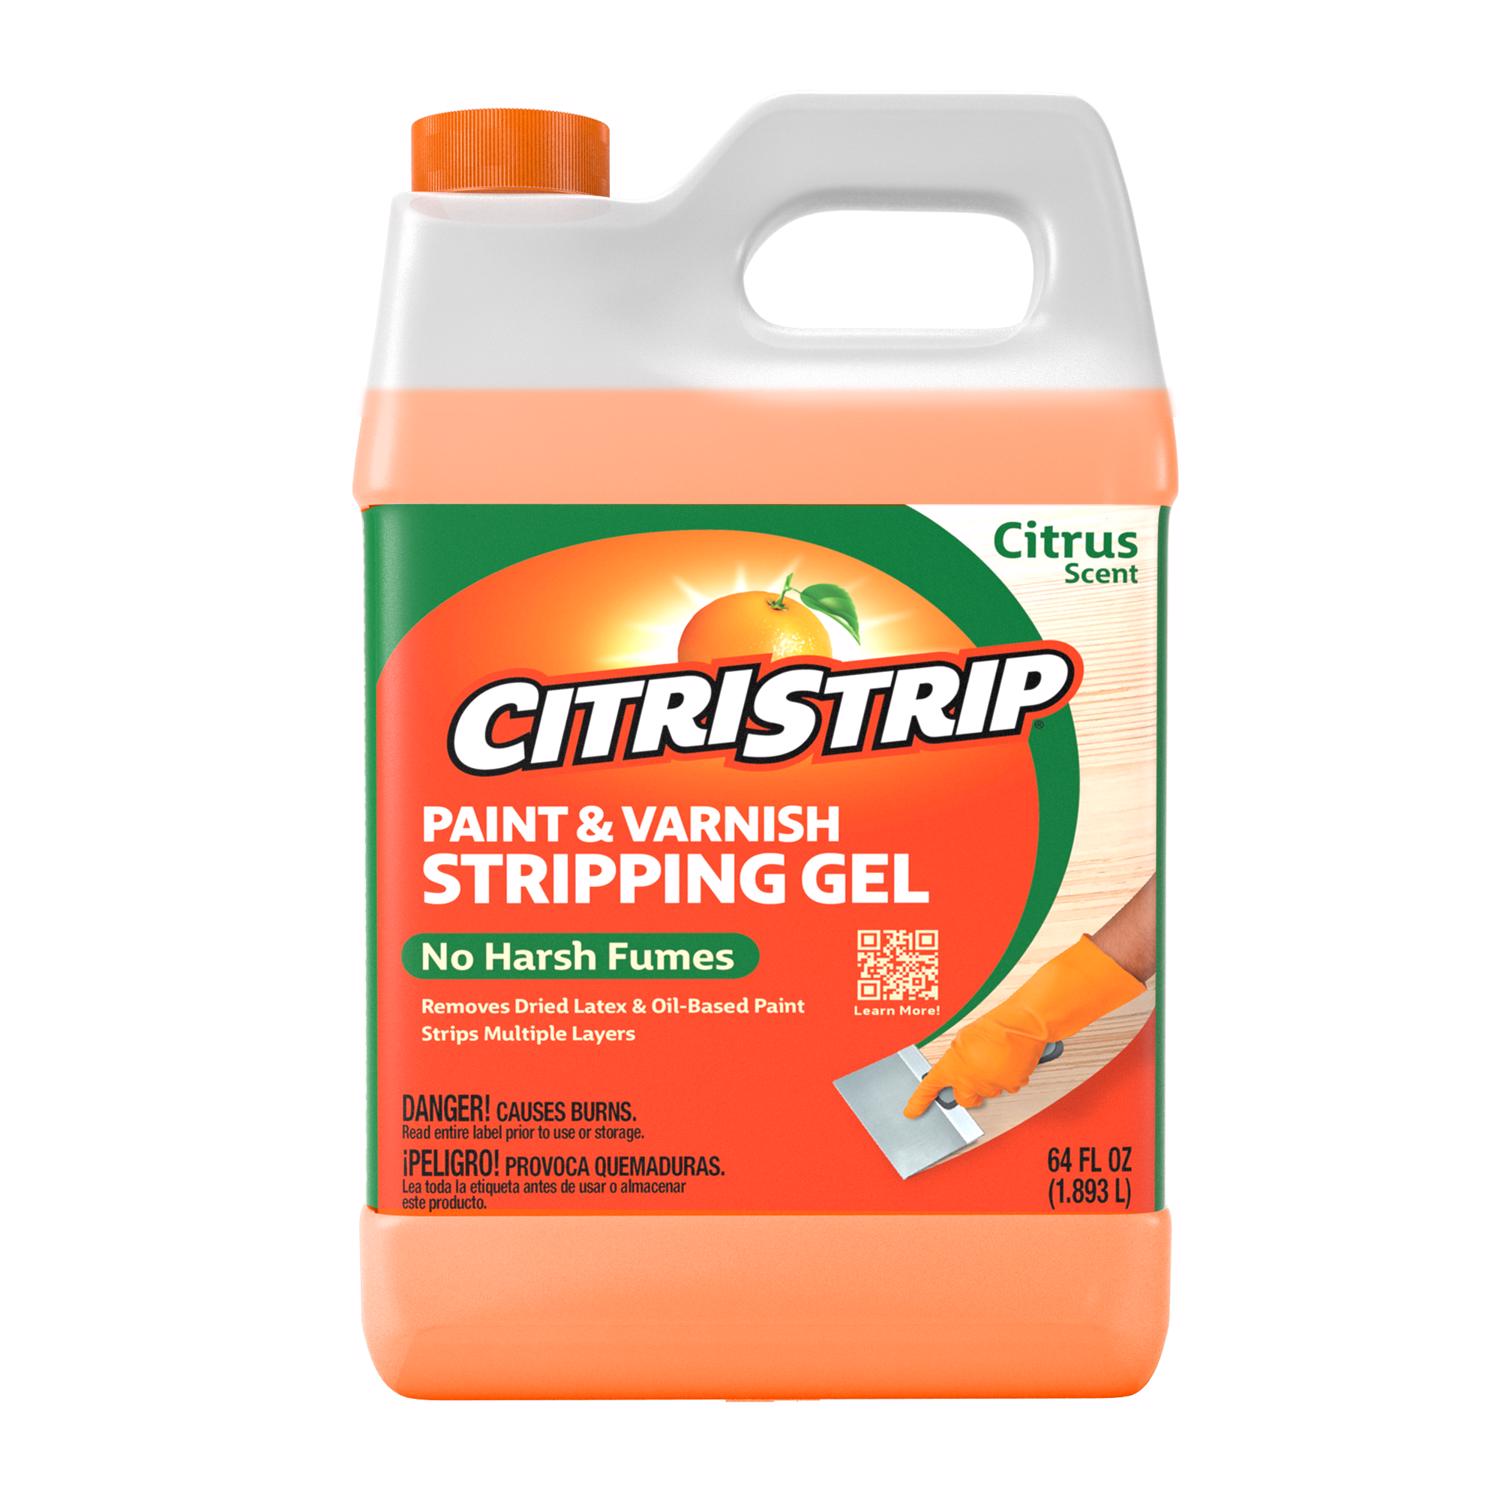 Citristrip Paint and Varnish Stripper 1/2 gal - Ace Hardware